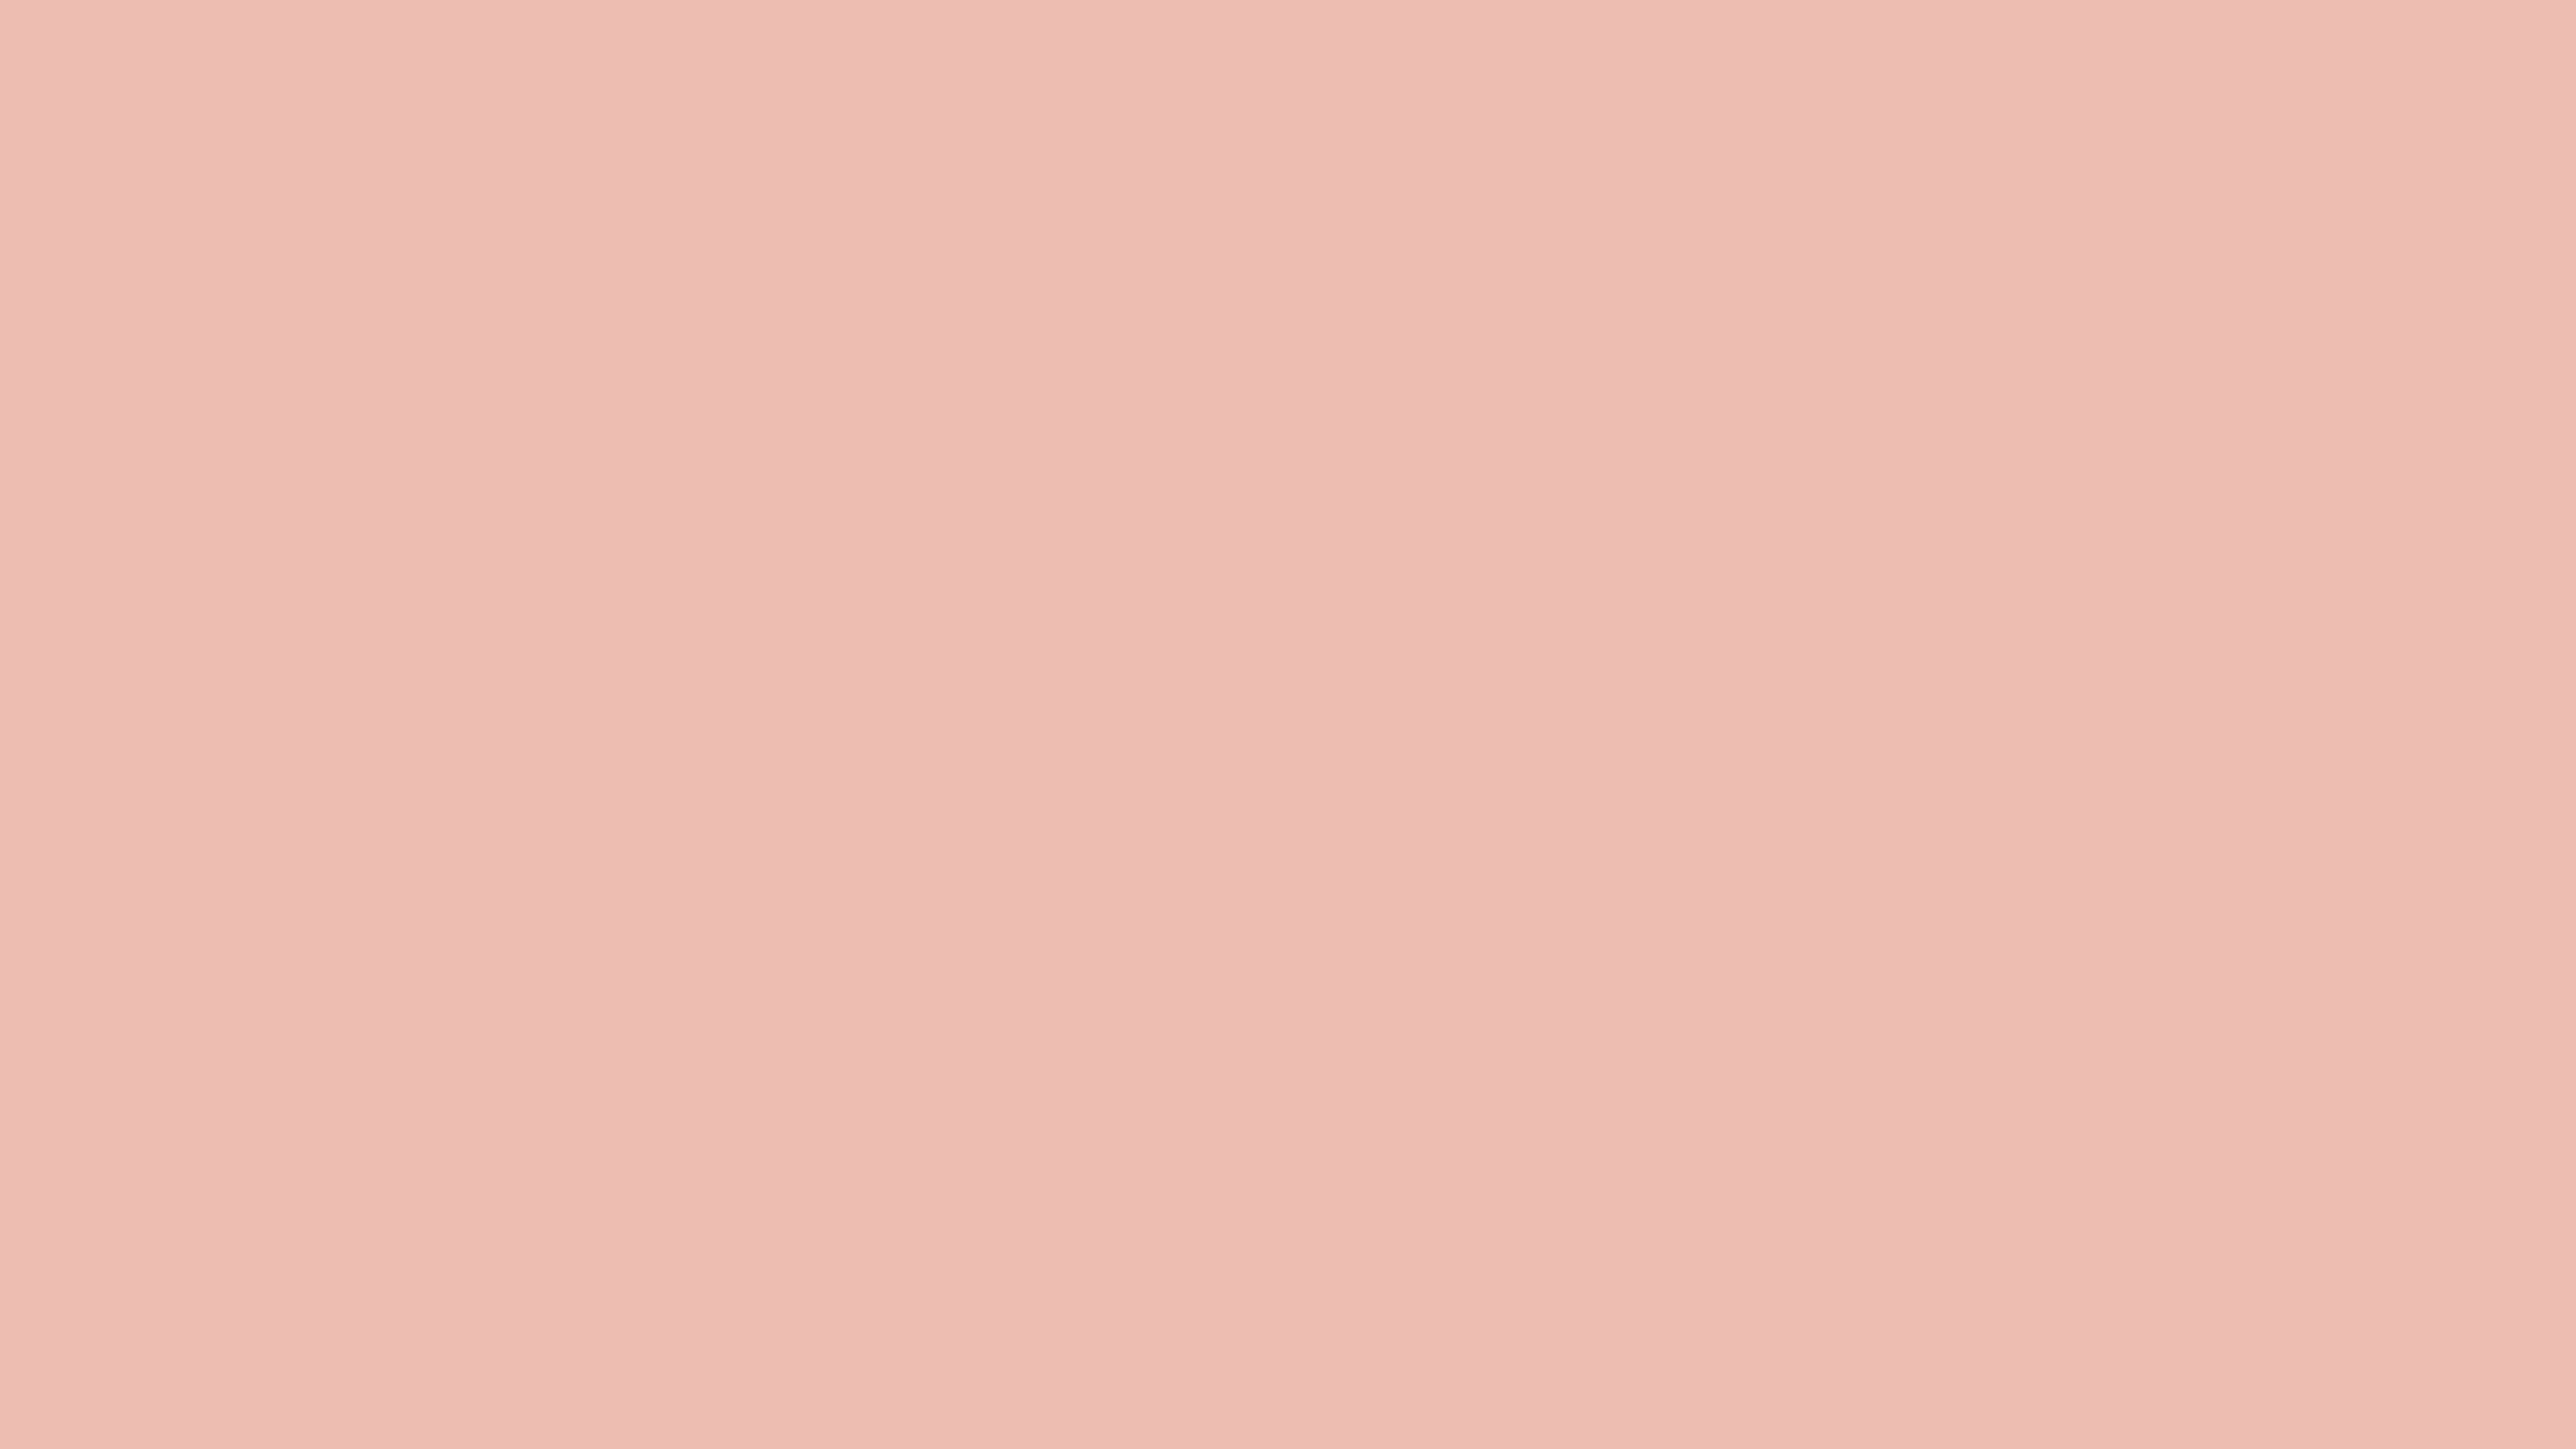 Virgin Peach Solid Color Background Image | Free Image Generator